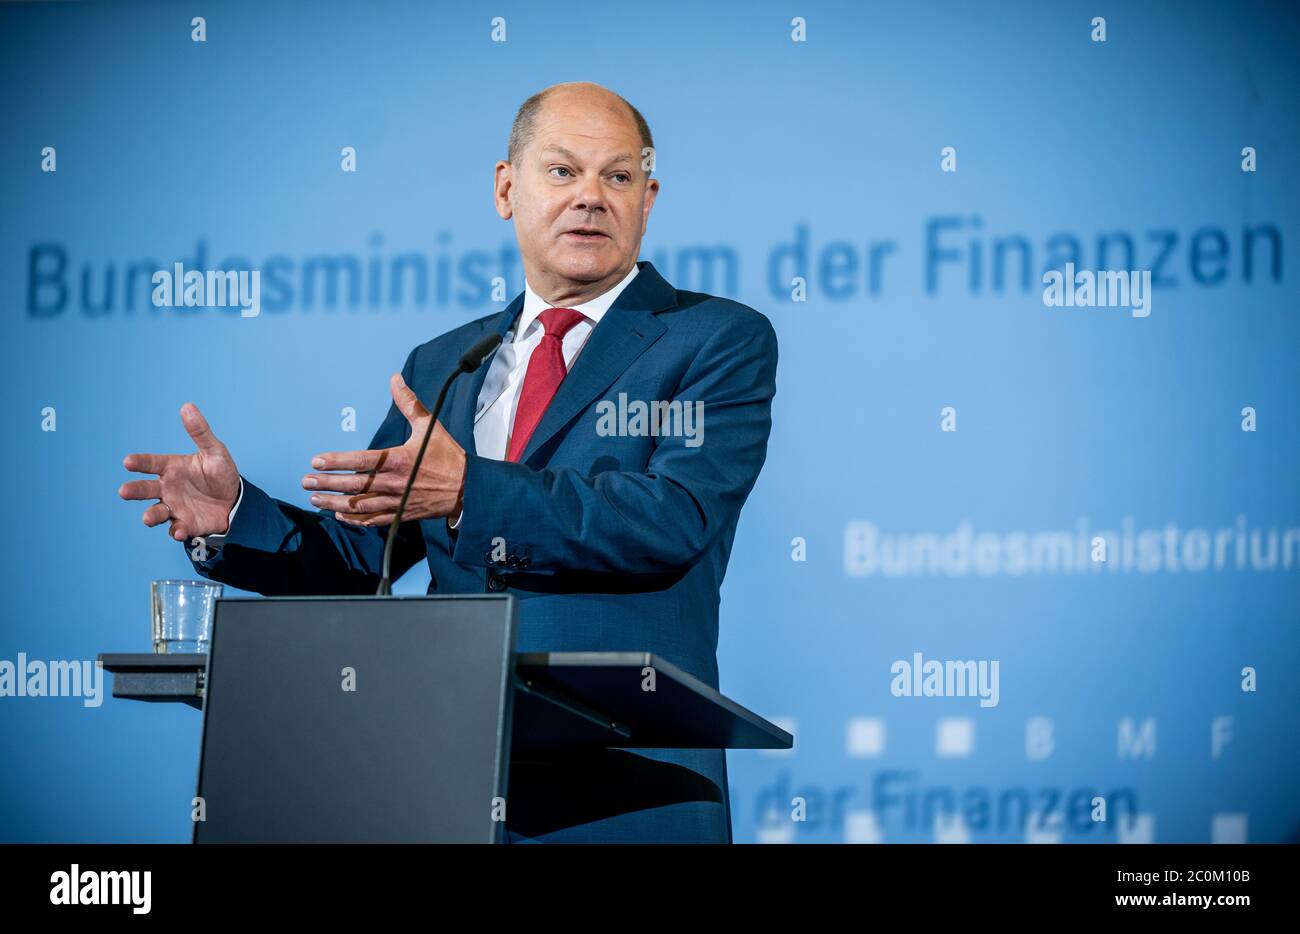 Berlin, Germany. 12th June, 2020. Olaf Scholz (SPD), Federal Minister of Finance, speaks at a press conference on the economic stimulus package in the context of the Corona aid. Credit: Michael Kappeler/dpa/Alamy Live News Stock Photo